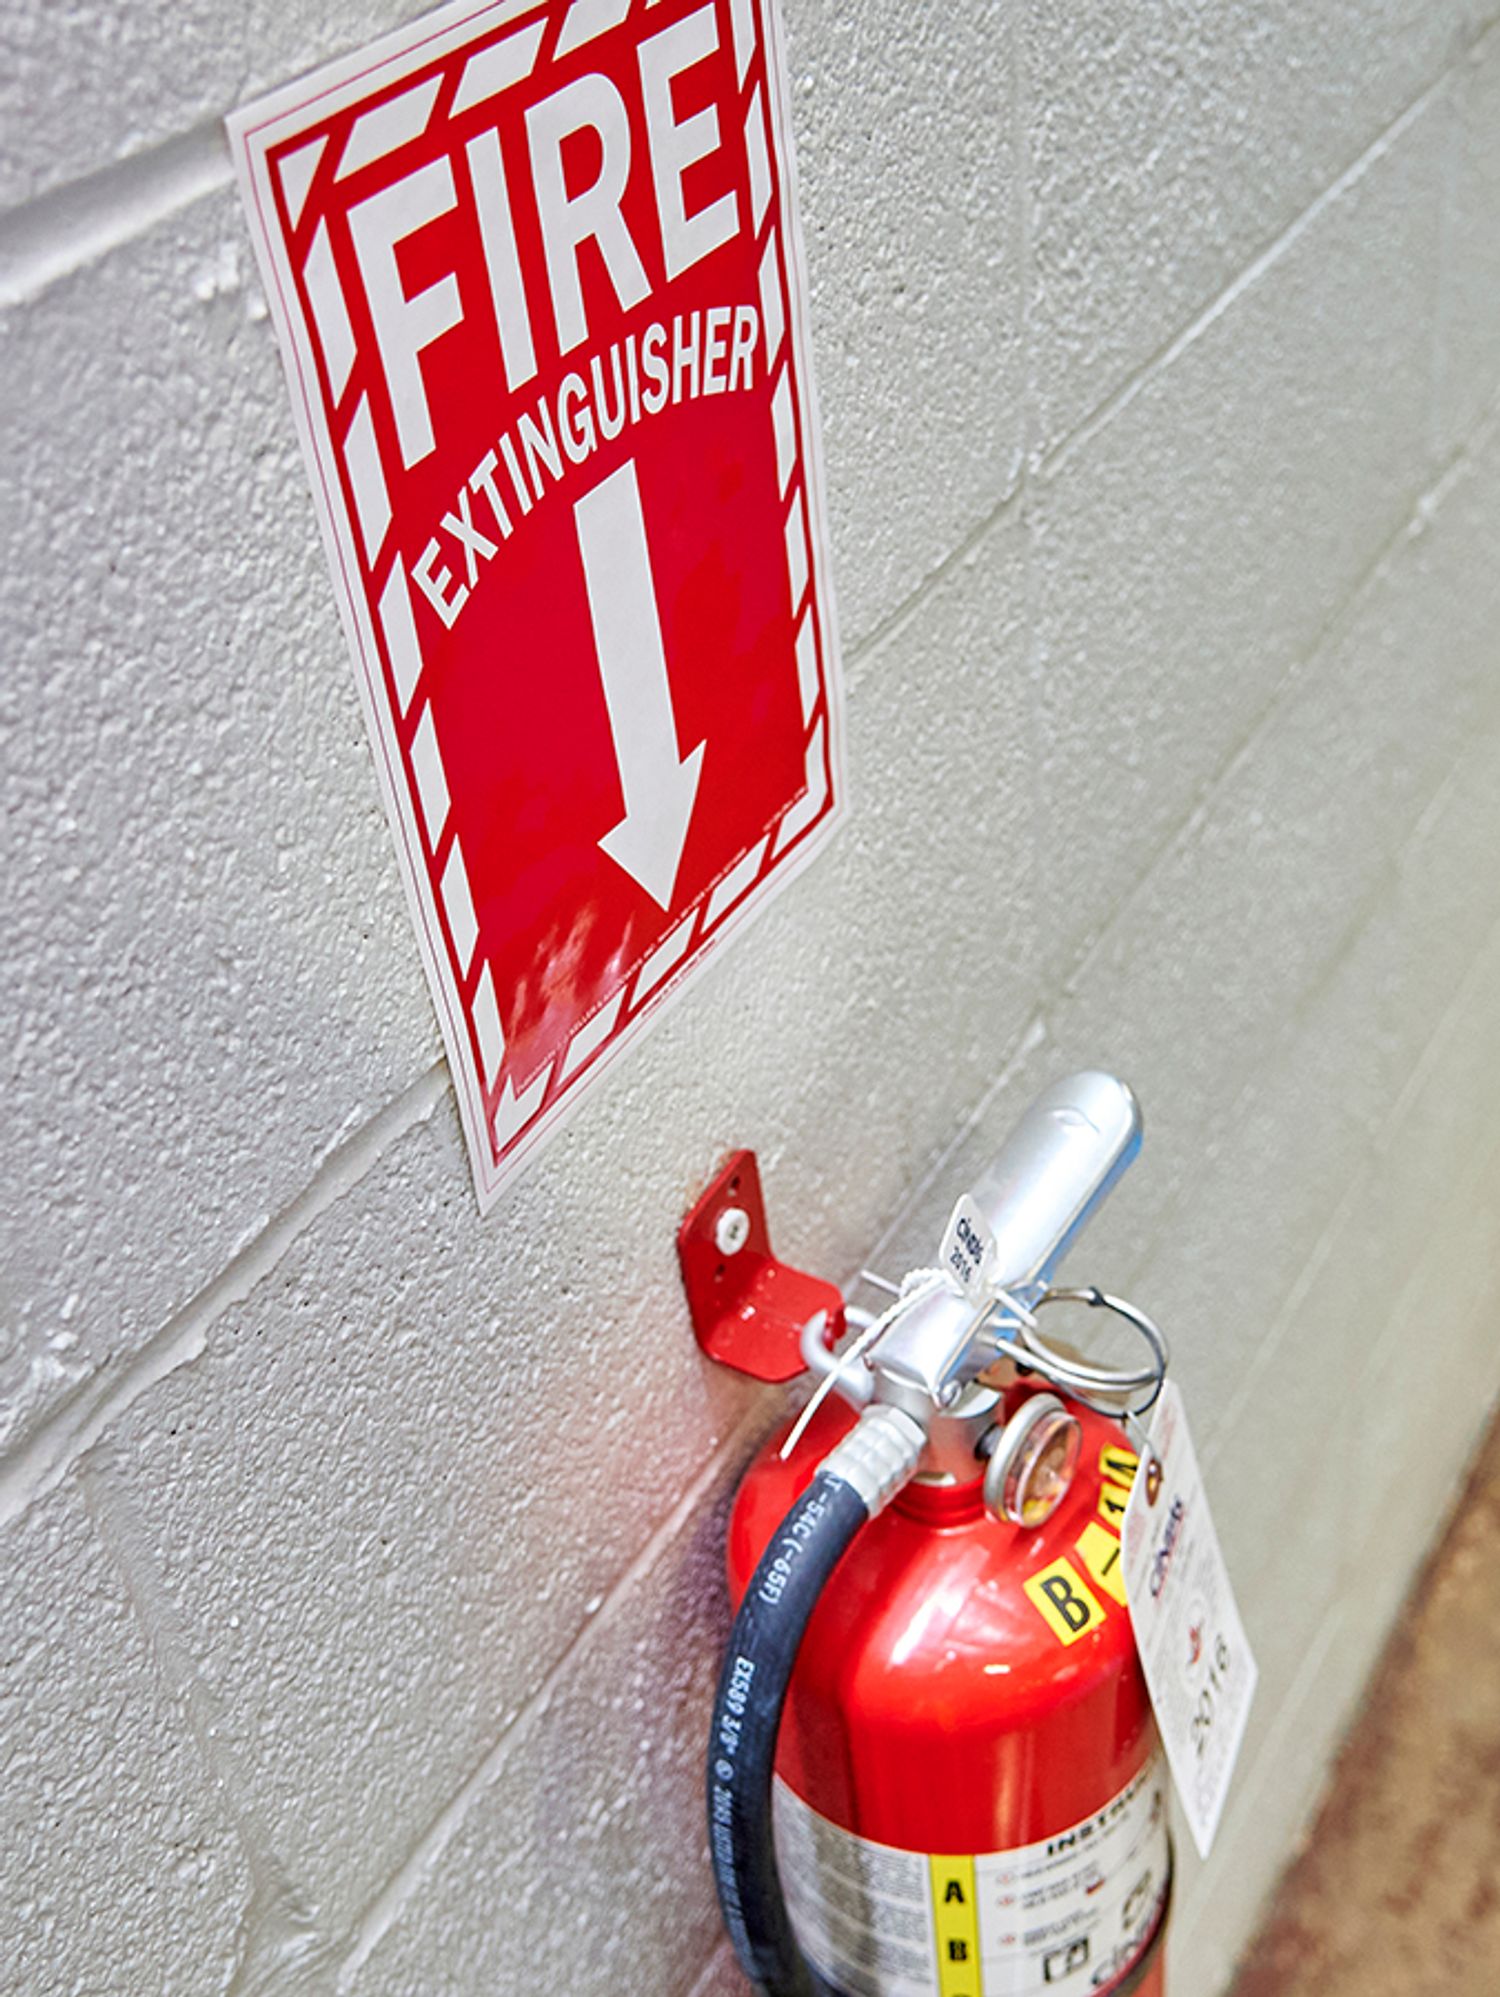 The Portable Fire Extinguisher Triad